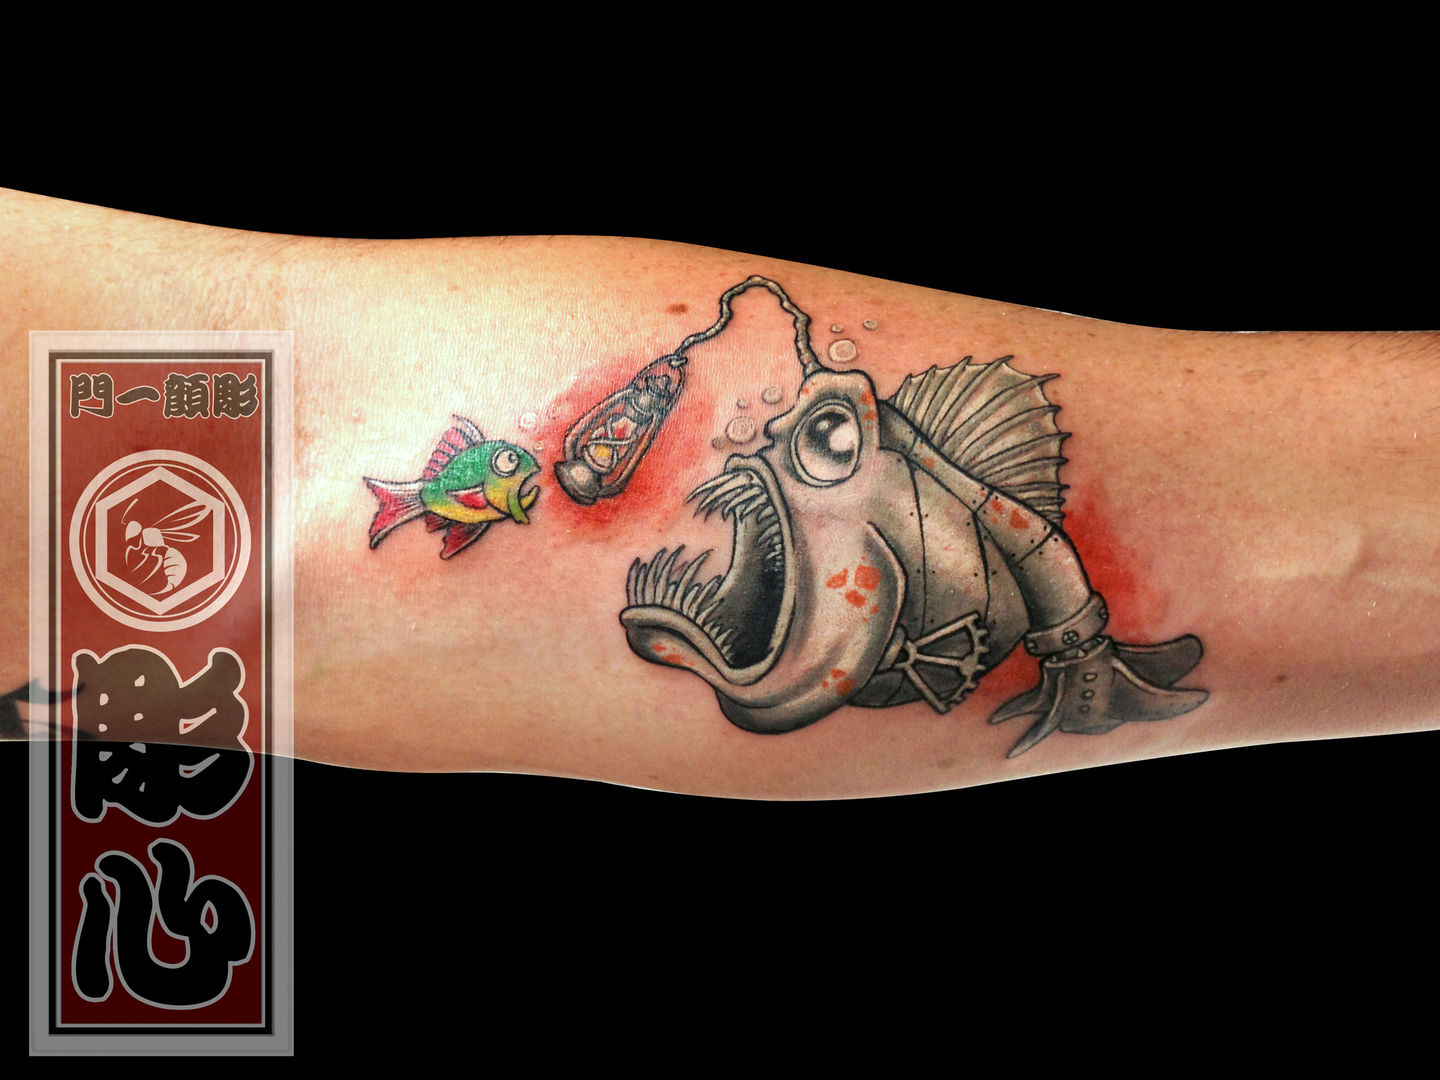 Neotraditional anglerfish tattoo on the thigh.